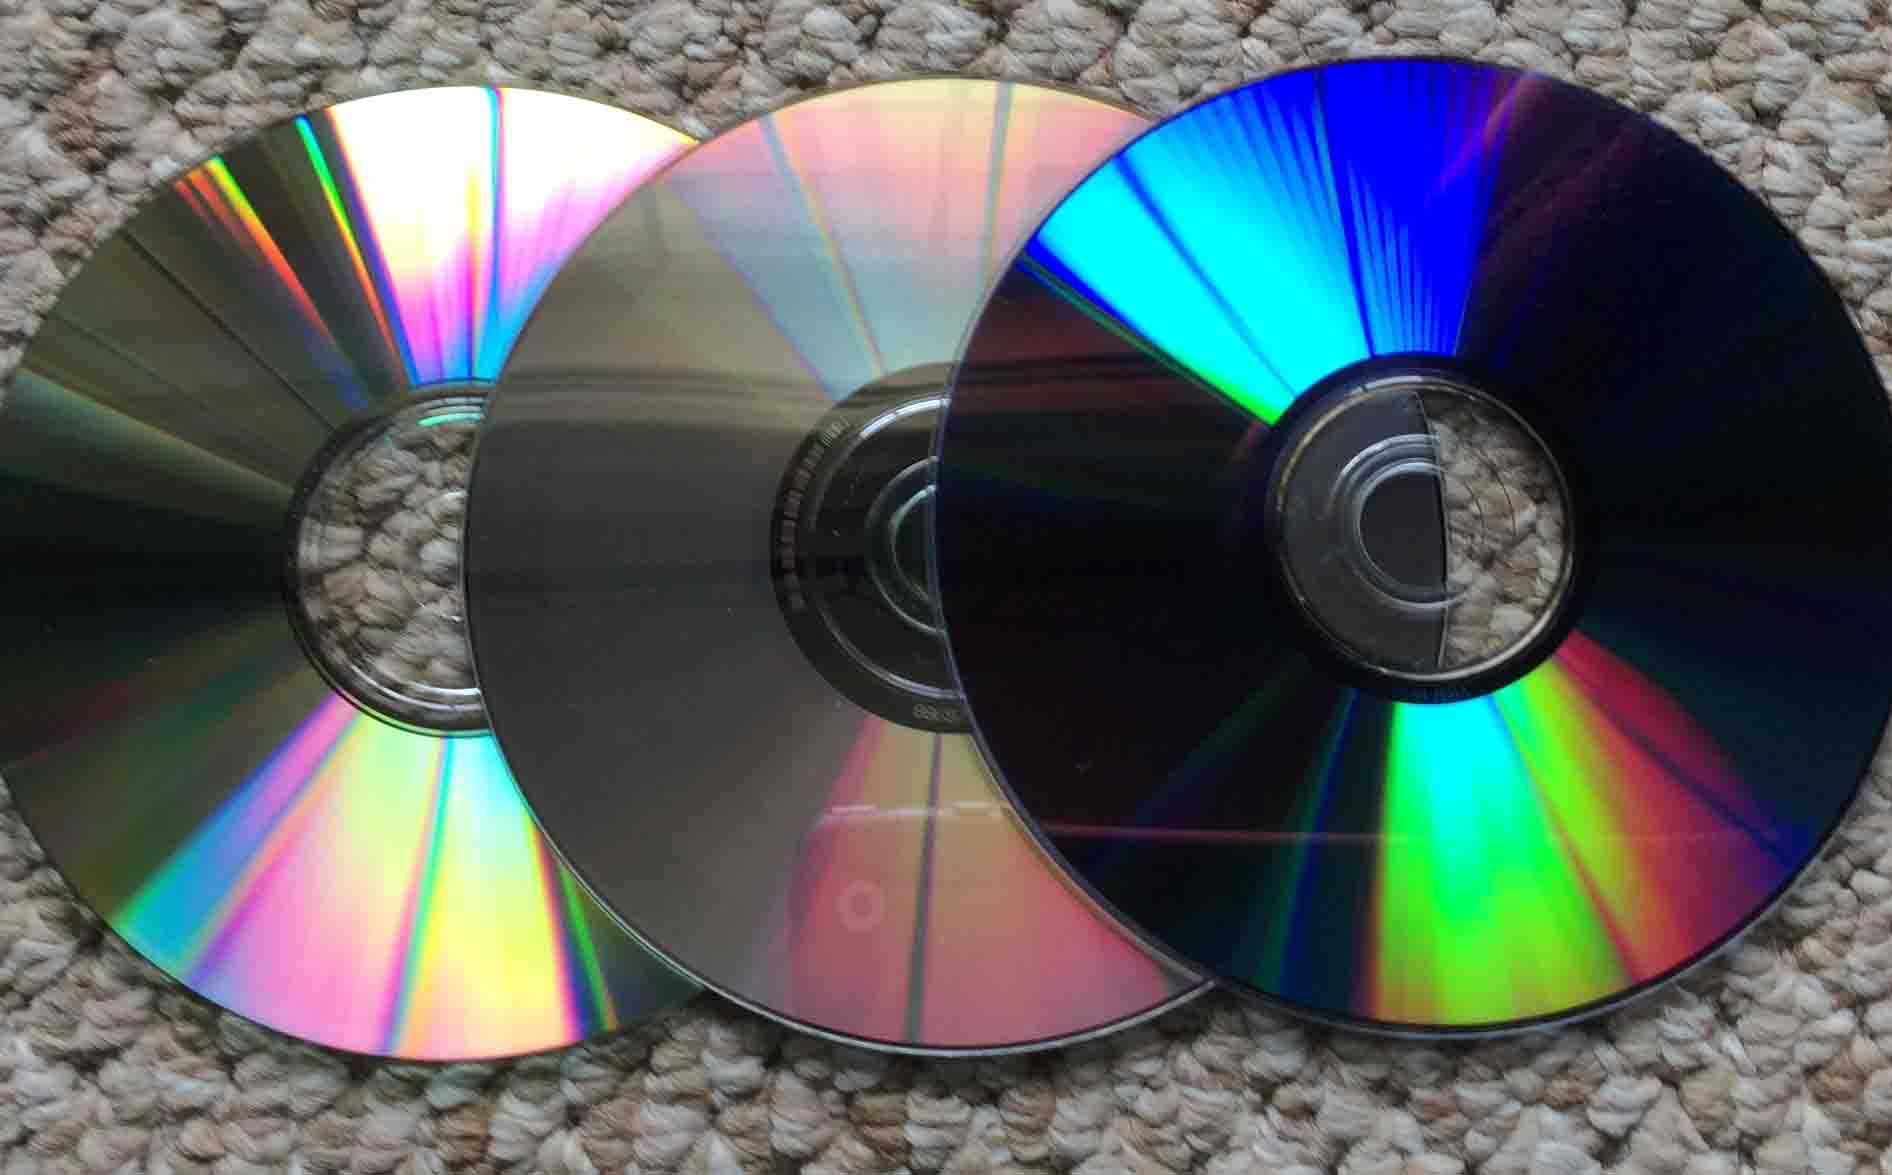 20 How To Clean A Blu Ray Disc? Quick Guide